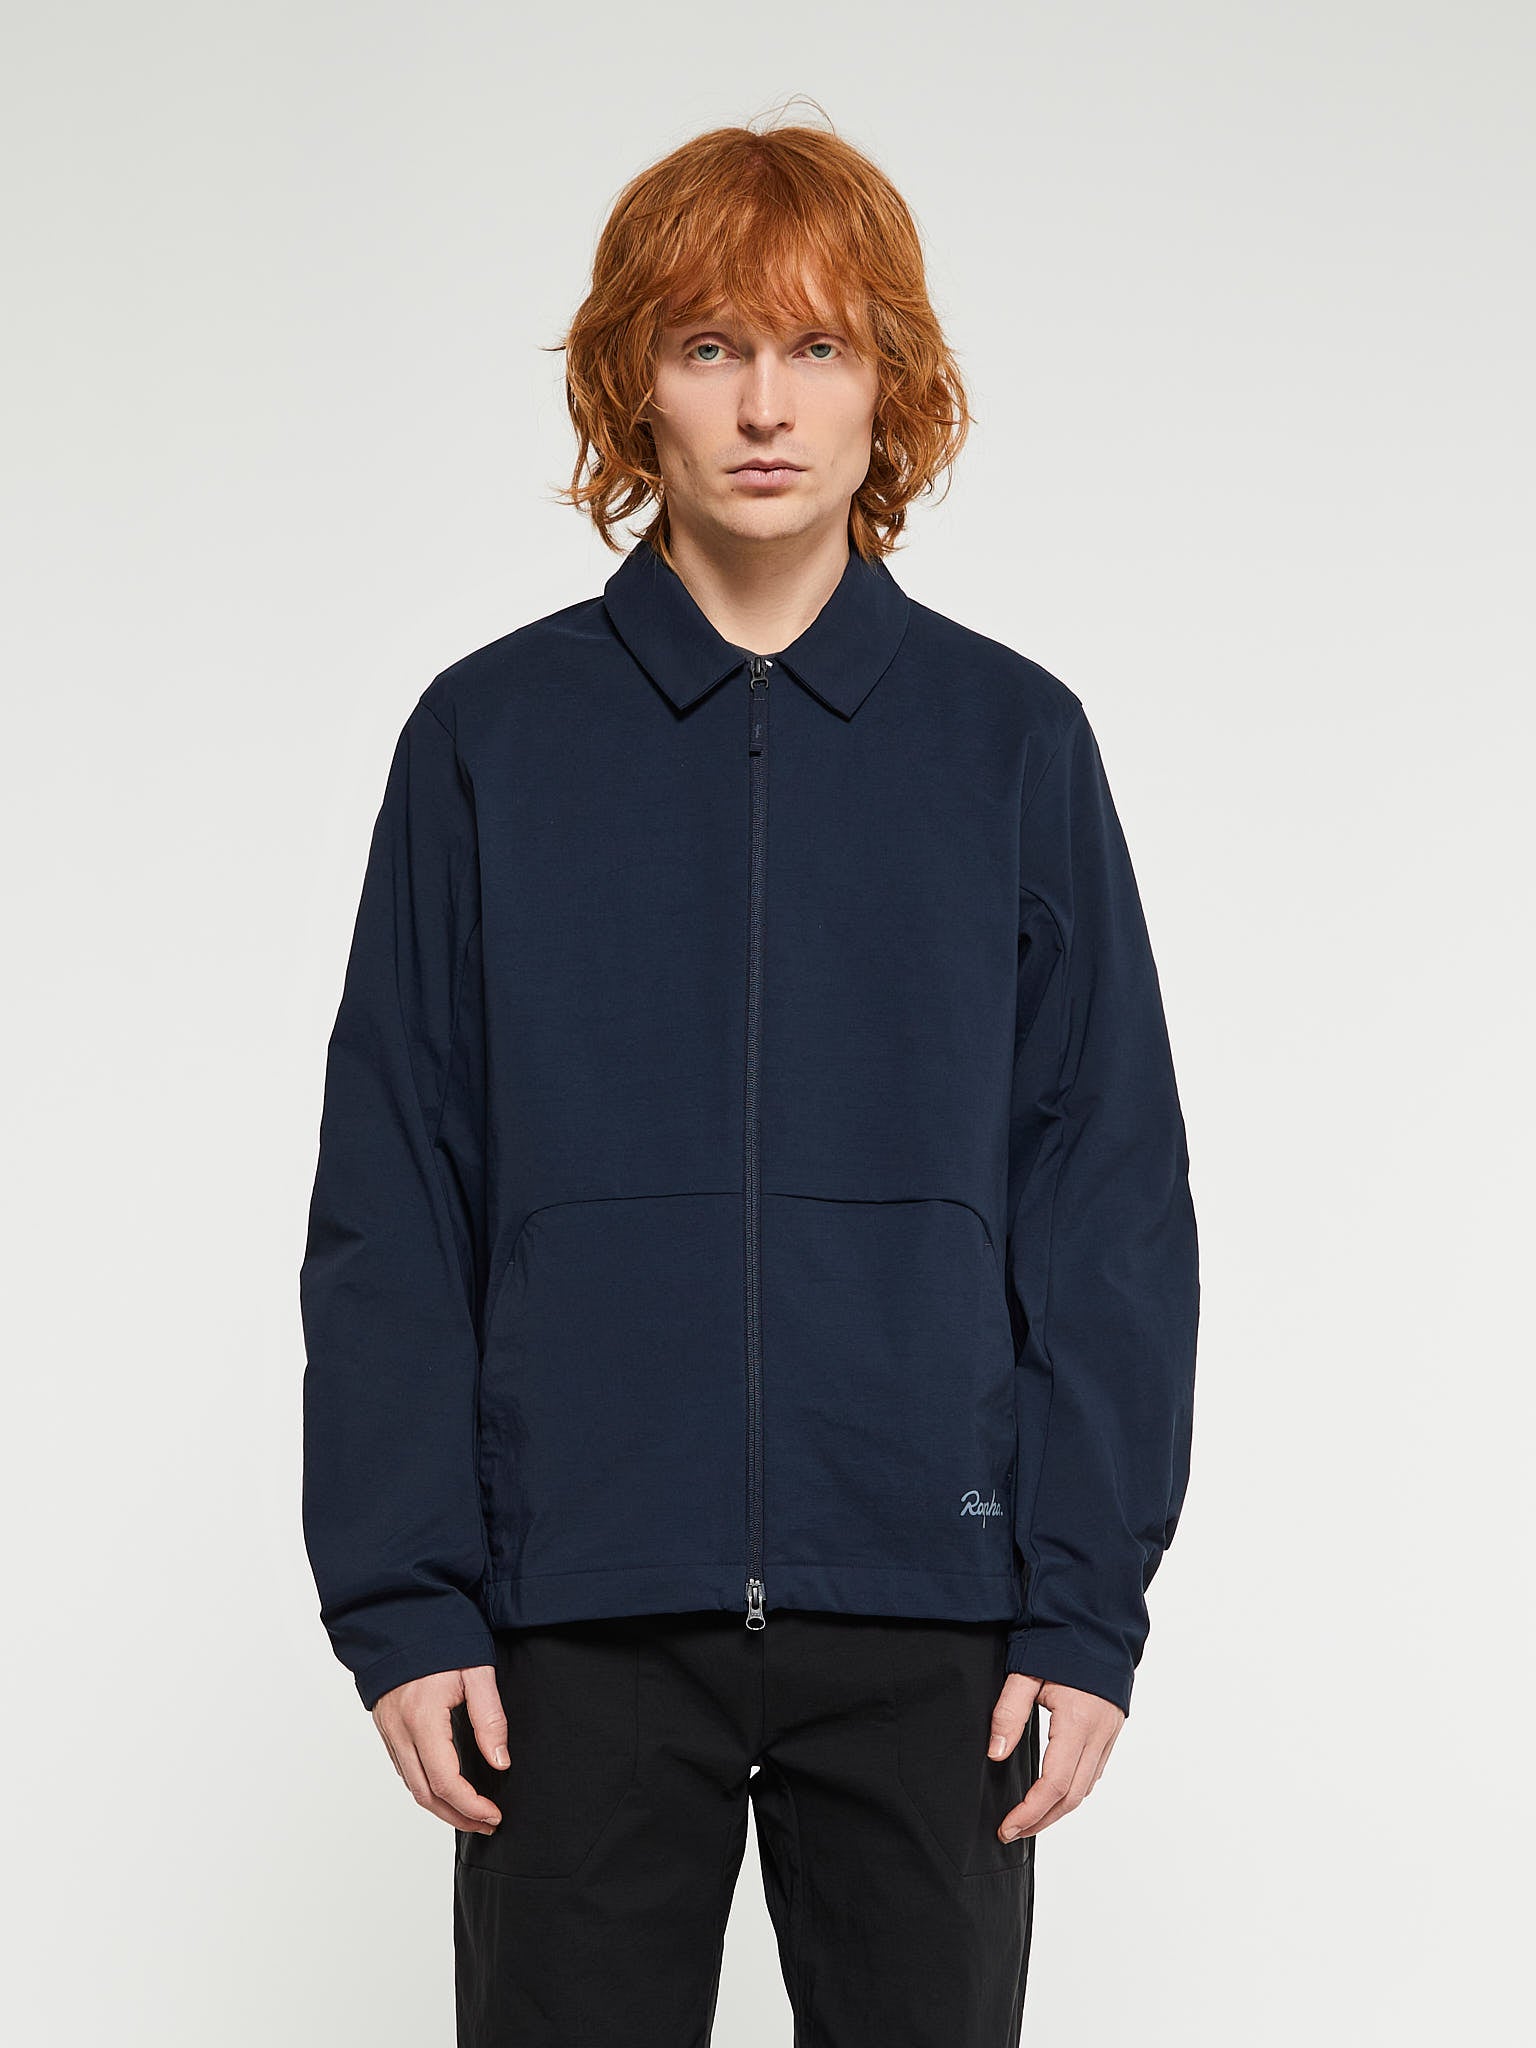 Technical Collar Jacket in Dark Navy and Black